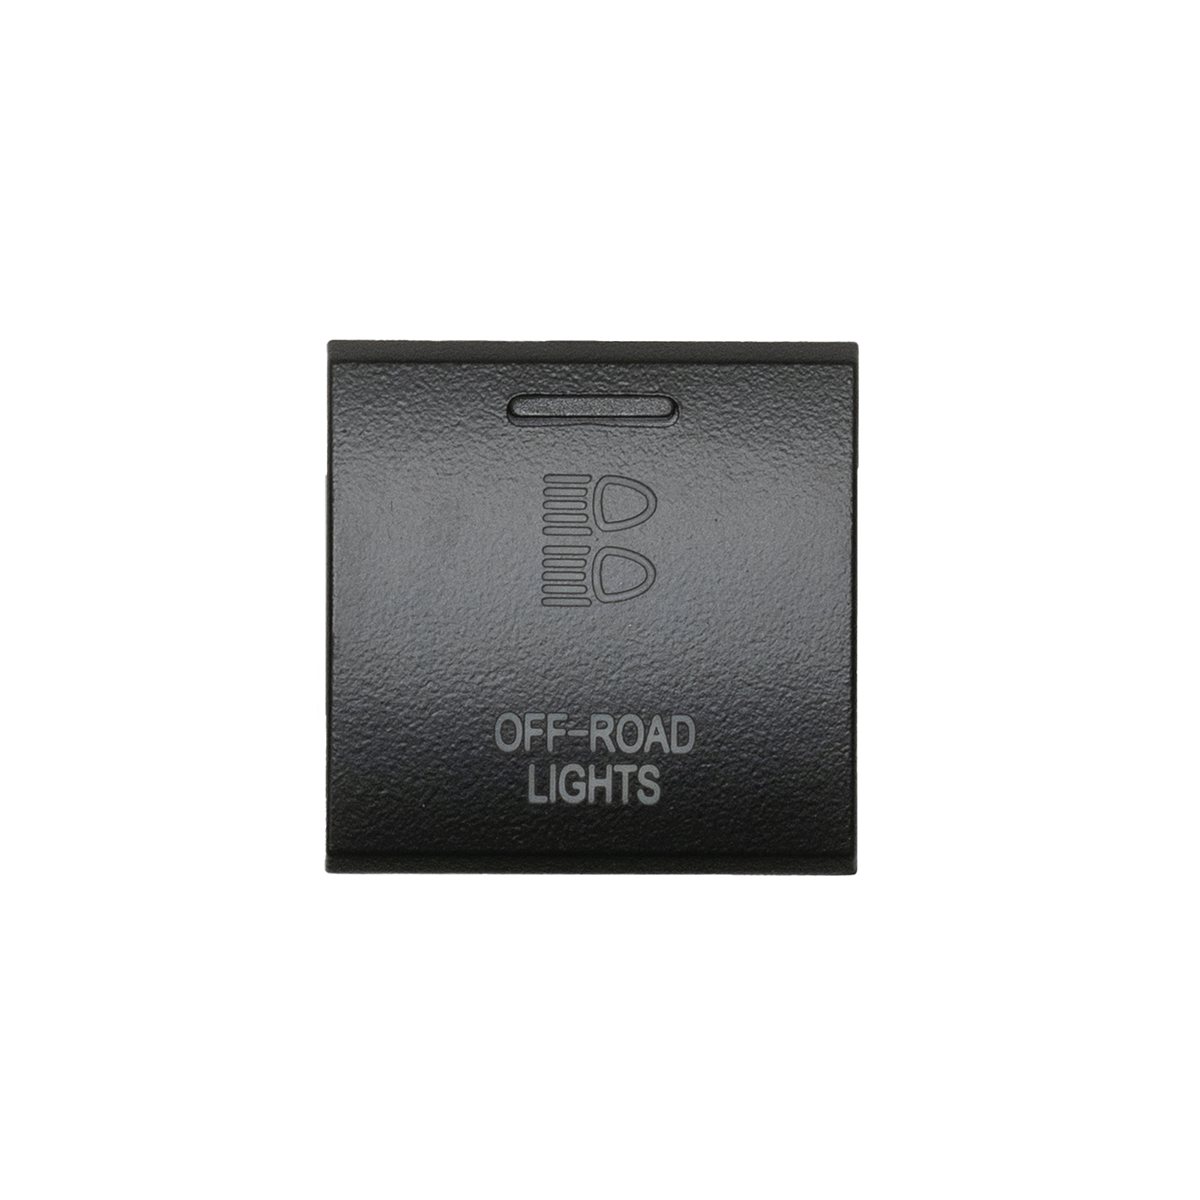 Cali Raised LED - Square Toyota OEM Style "Off-Road Lights" Switch